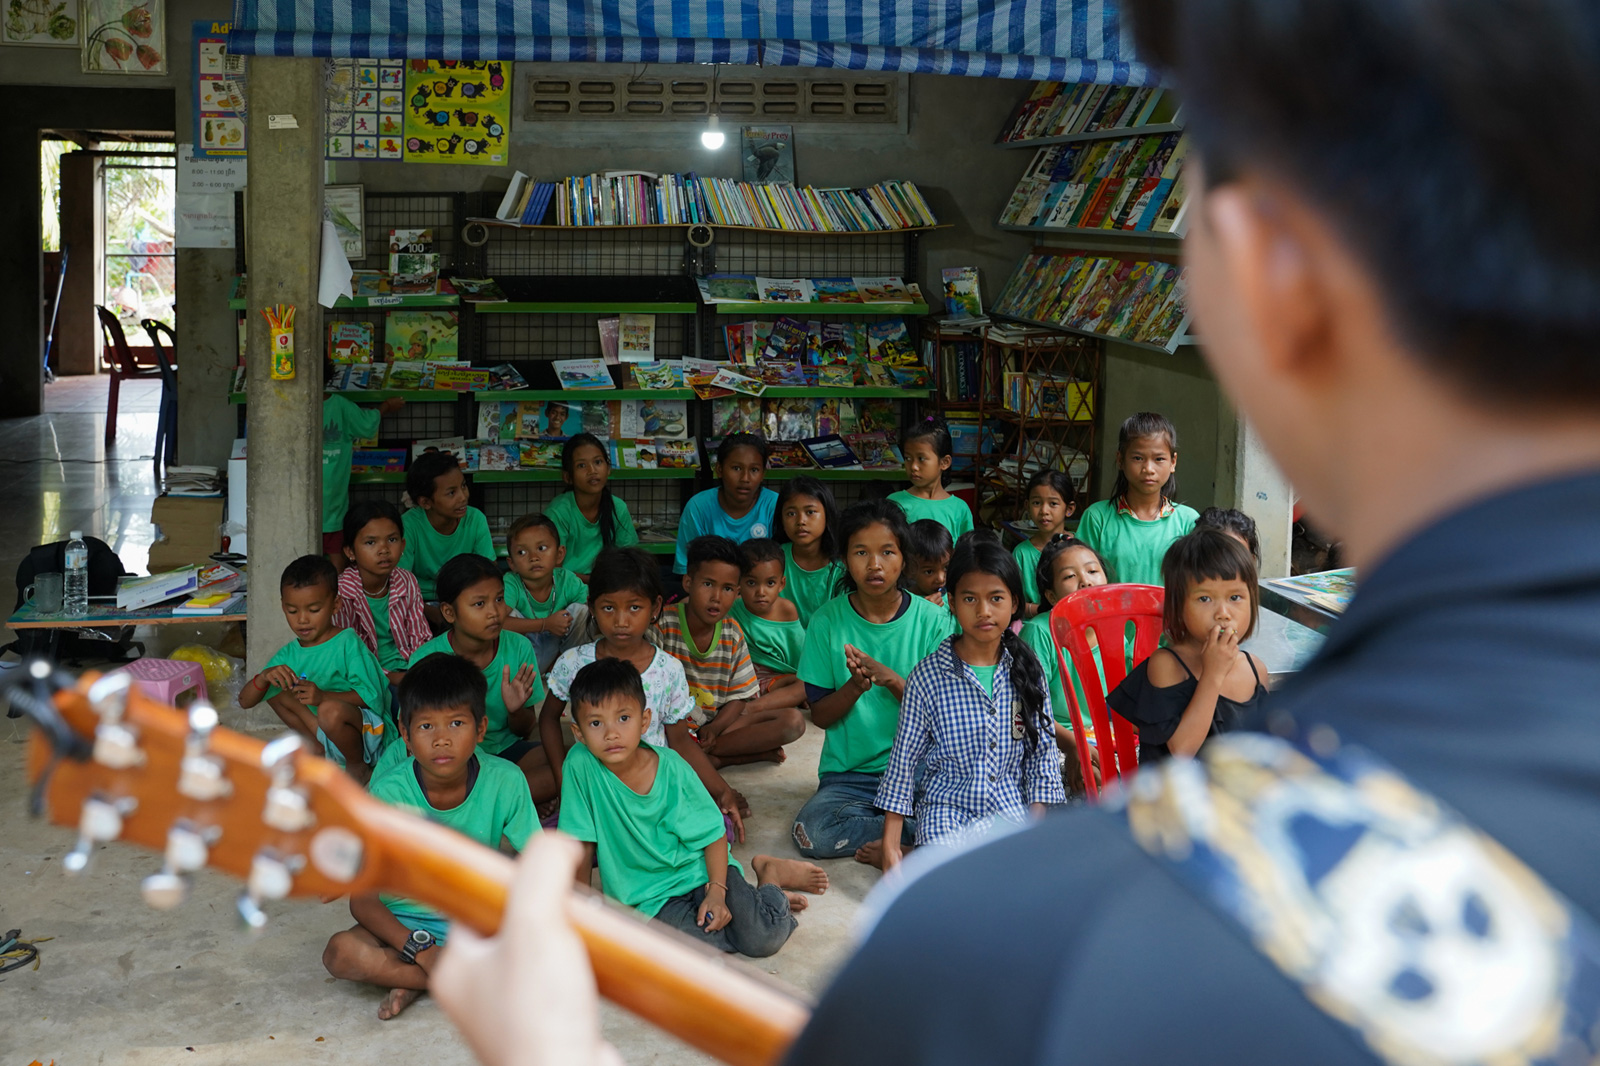 A youth volunteer from Siem Reap City plays guitar for students at the Village Library in Areak Svay Village after learning about the project on social media.